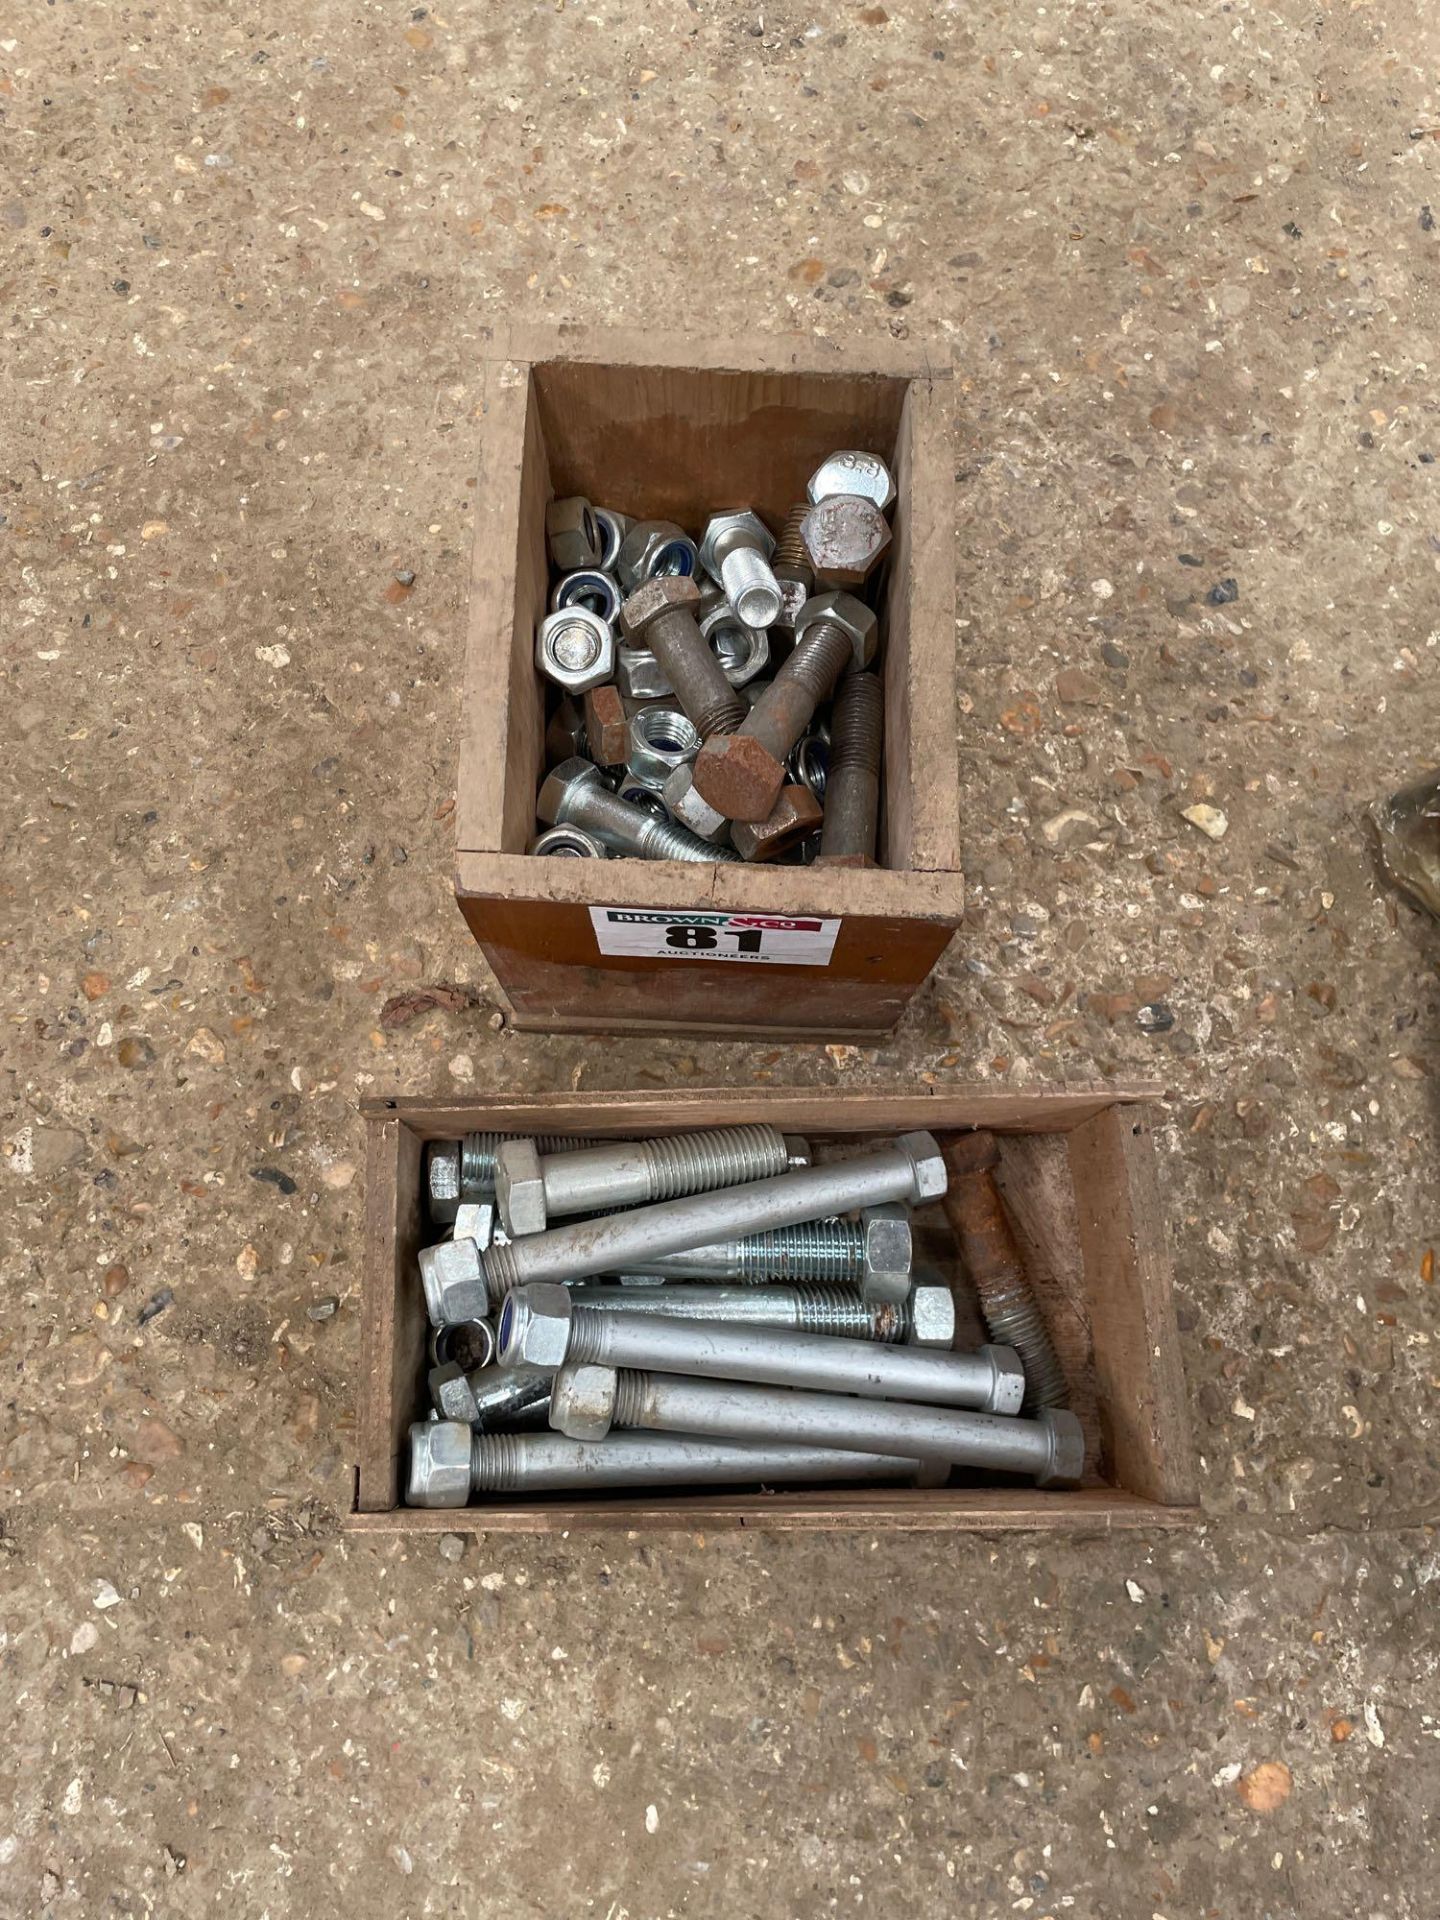 Heavy duty nuts and bolts